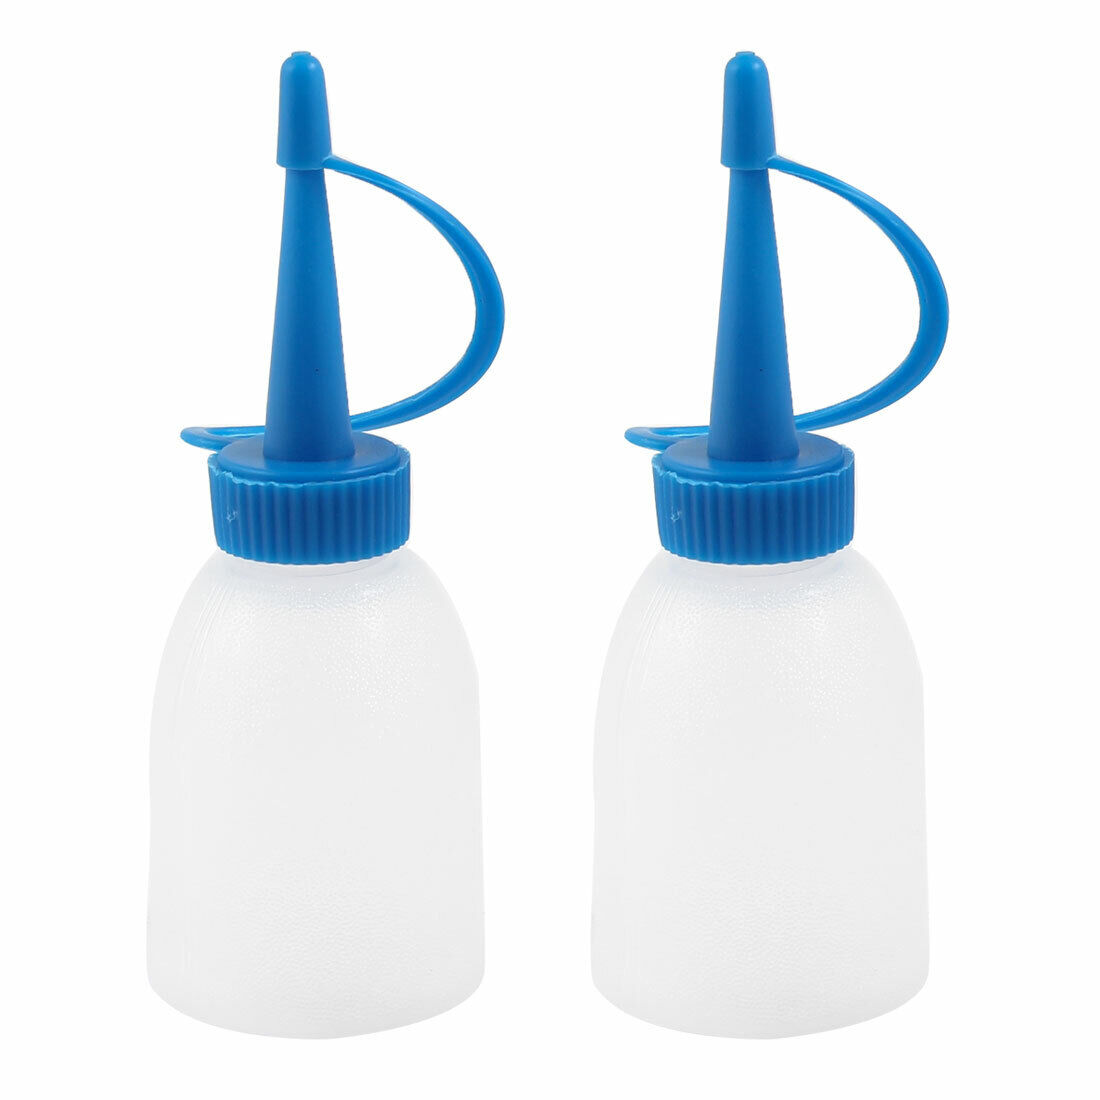 2pcs Clear Blue White 30ml Printer Ink Bottle Holder Squeeze